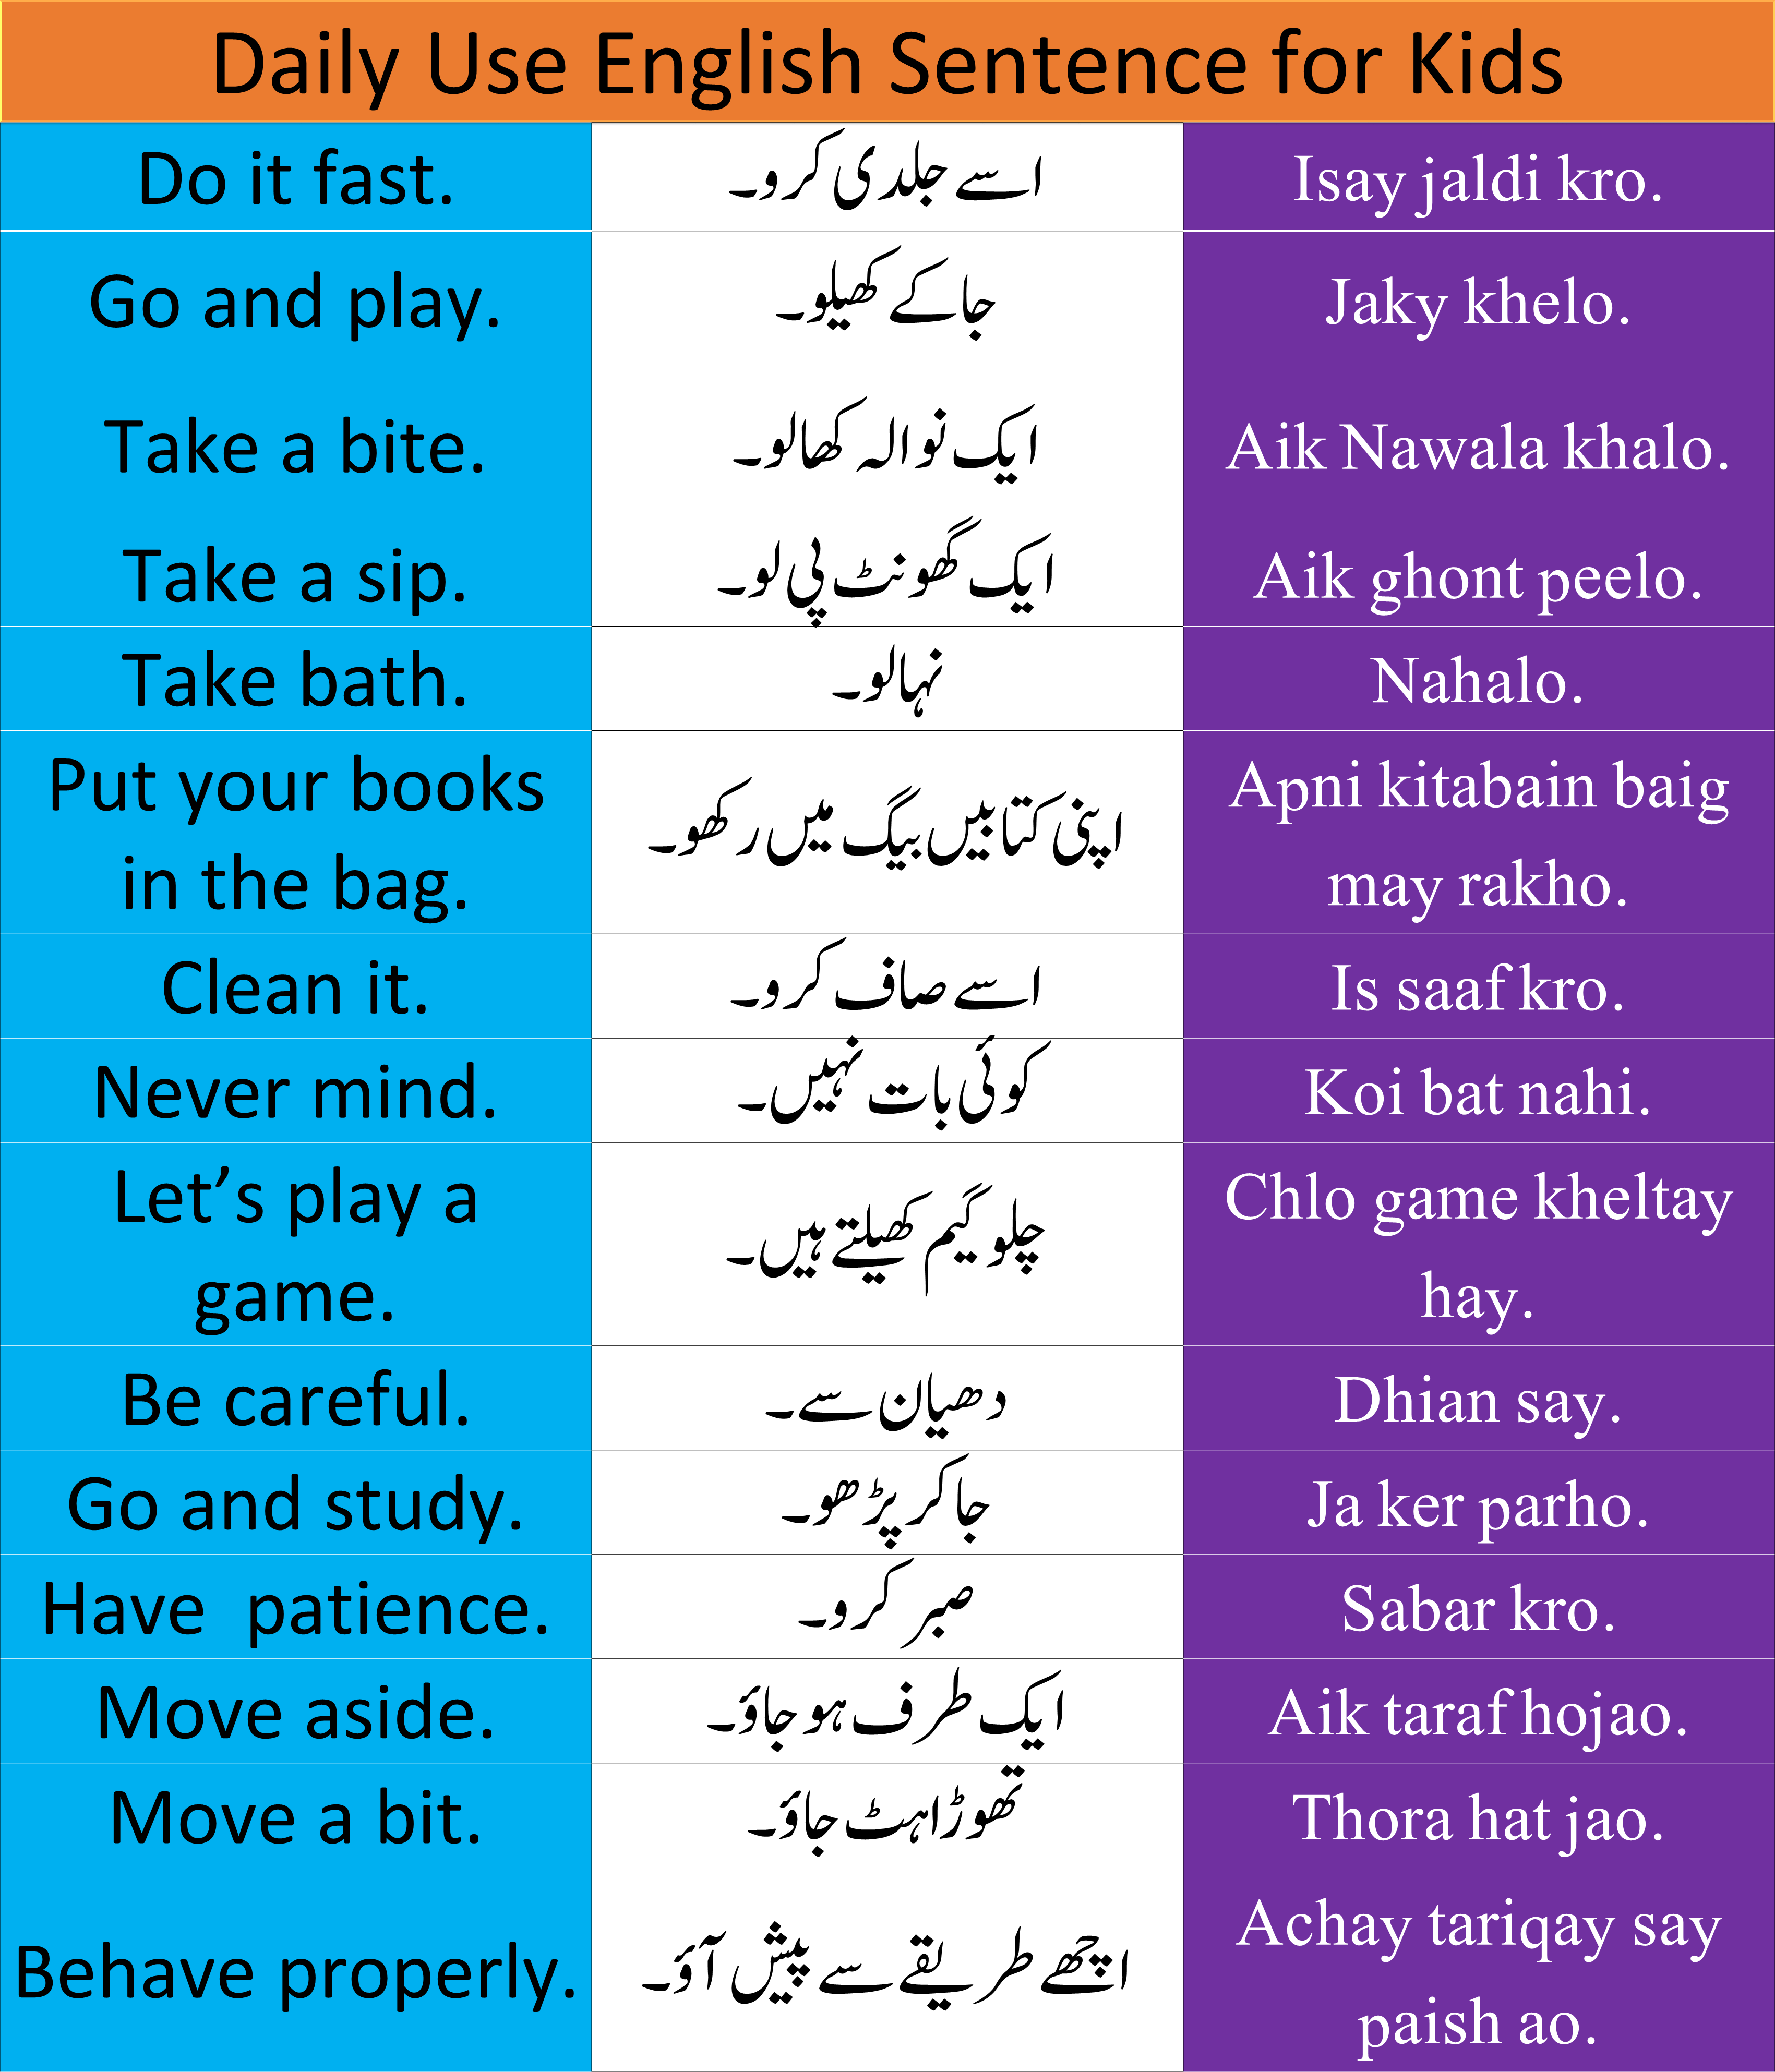 Daily Use English Sentences For Kids In Urdu And Hindi Translation